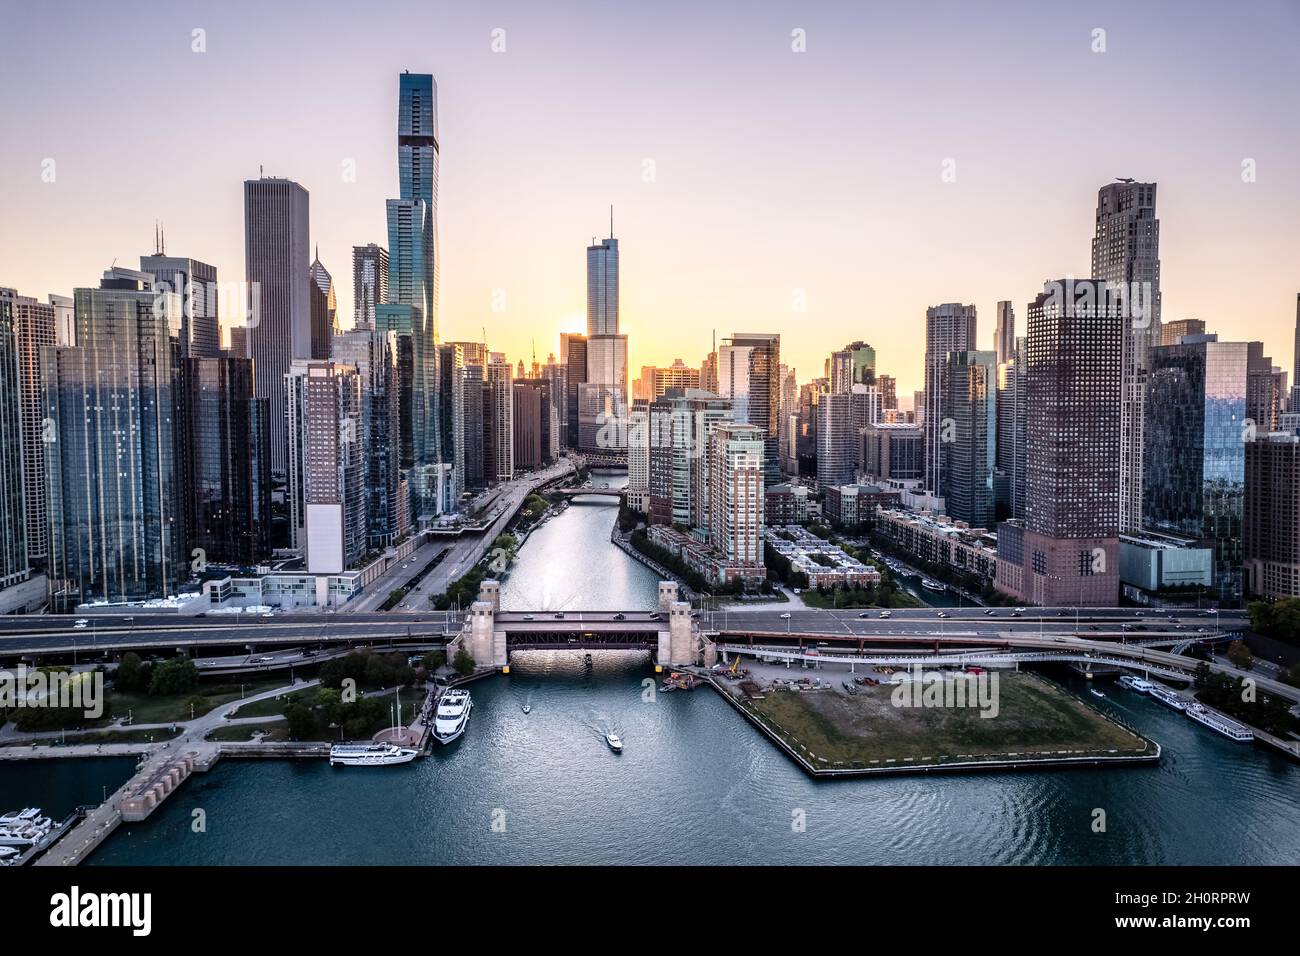 Aerial view of Chicago River and city skyline at sunset, Chicago, Illinois, USA Stock Photo